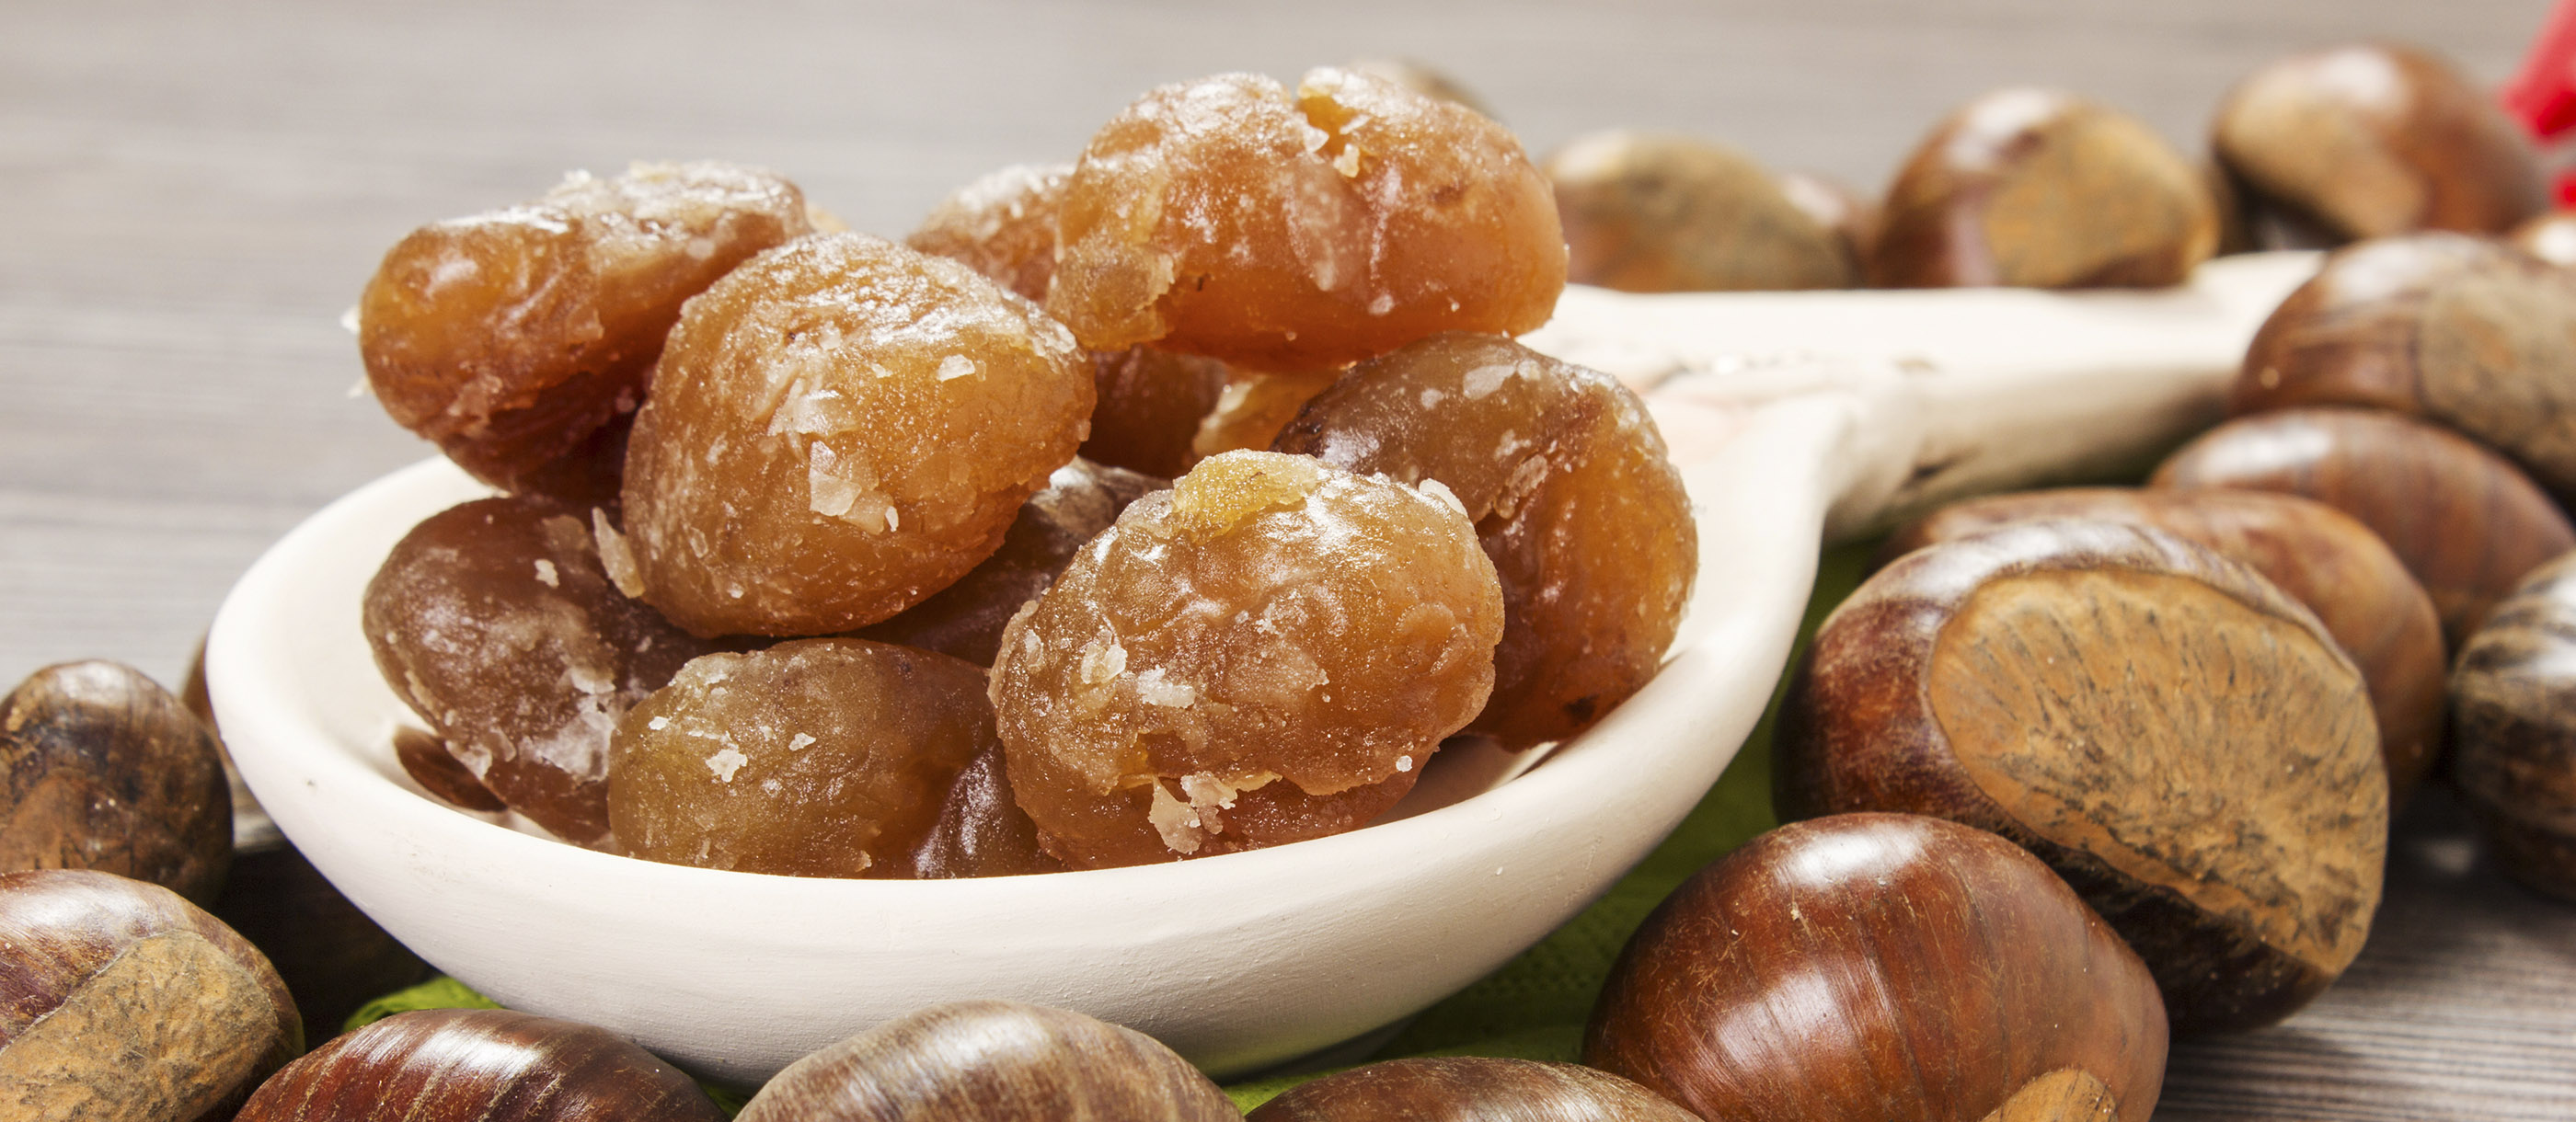 Marron glacé, or candied chestnuts are back! - The Frenchman's Corner